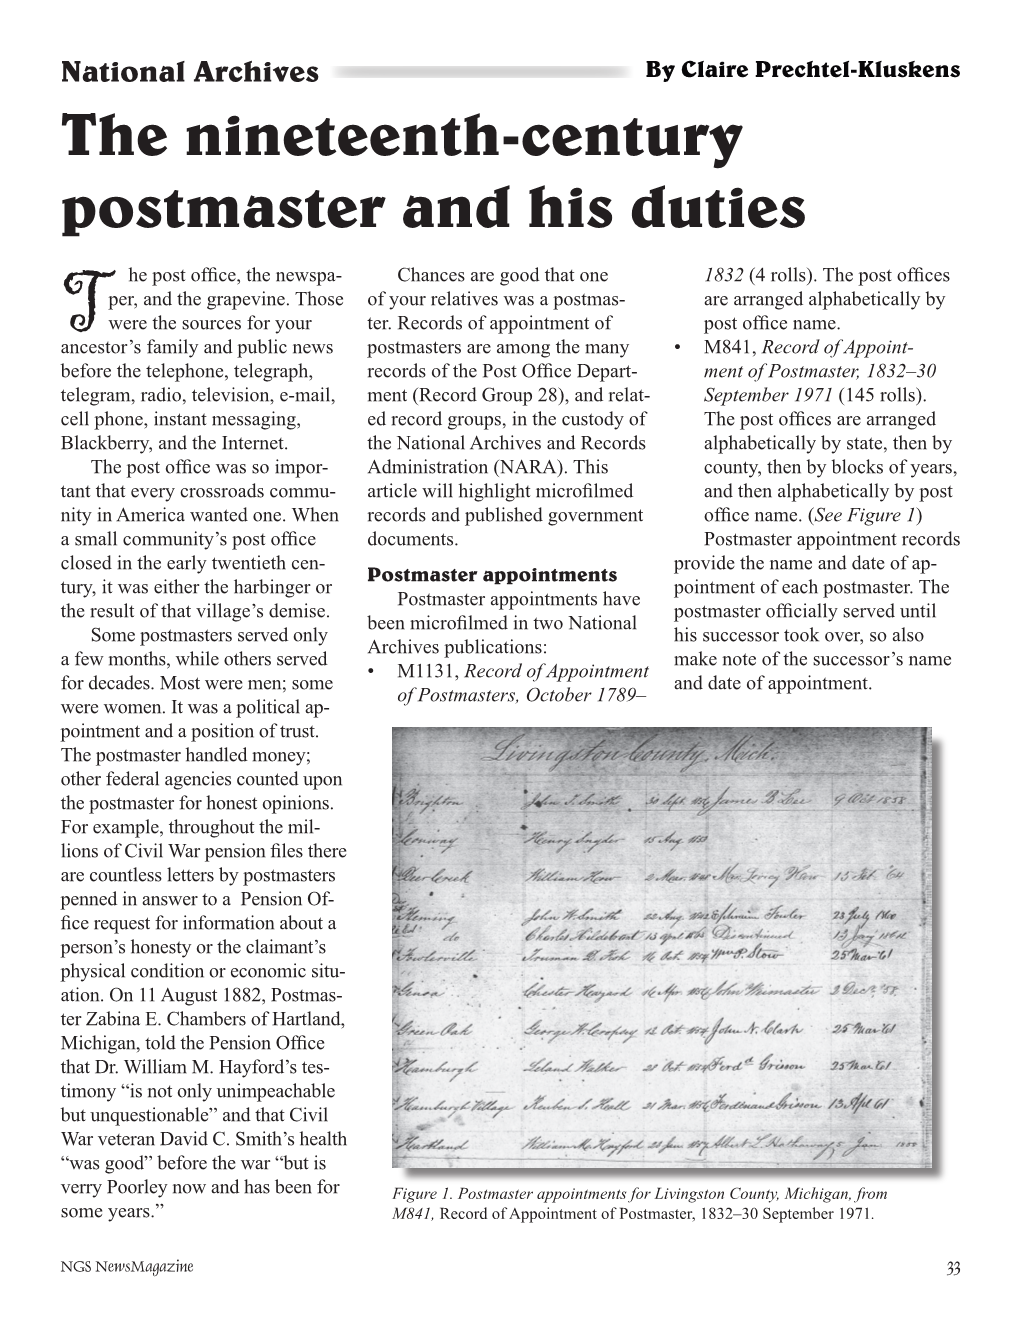 The Nineteenth-Century Postmaster and His Duties